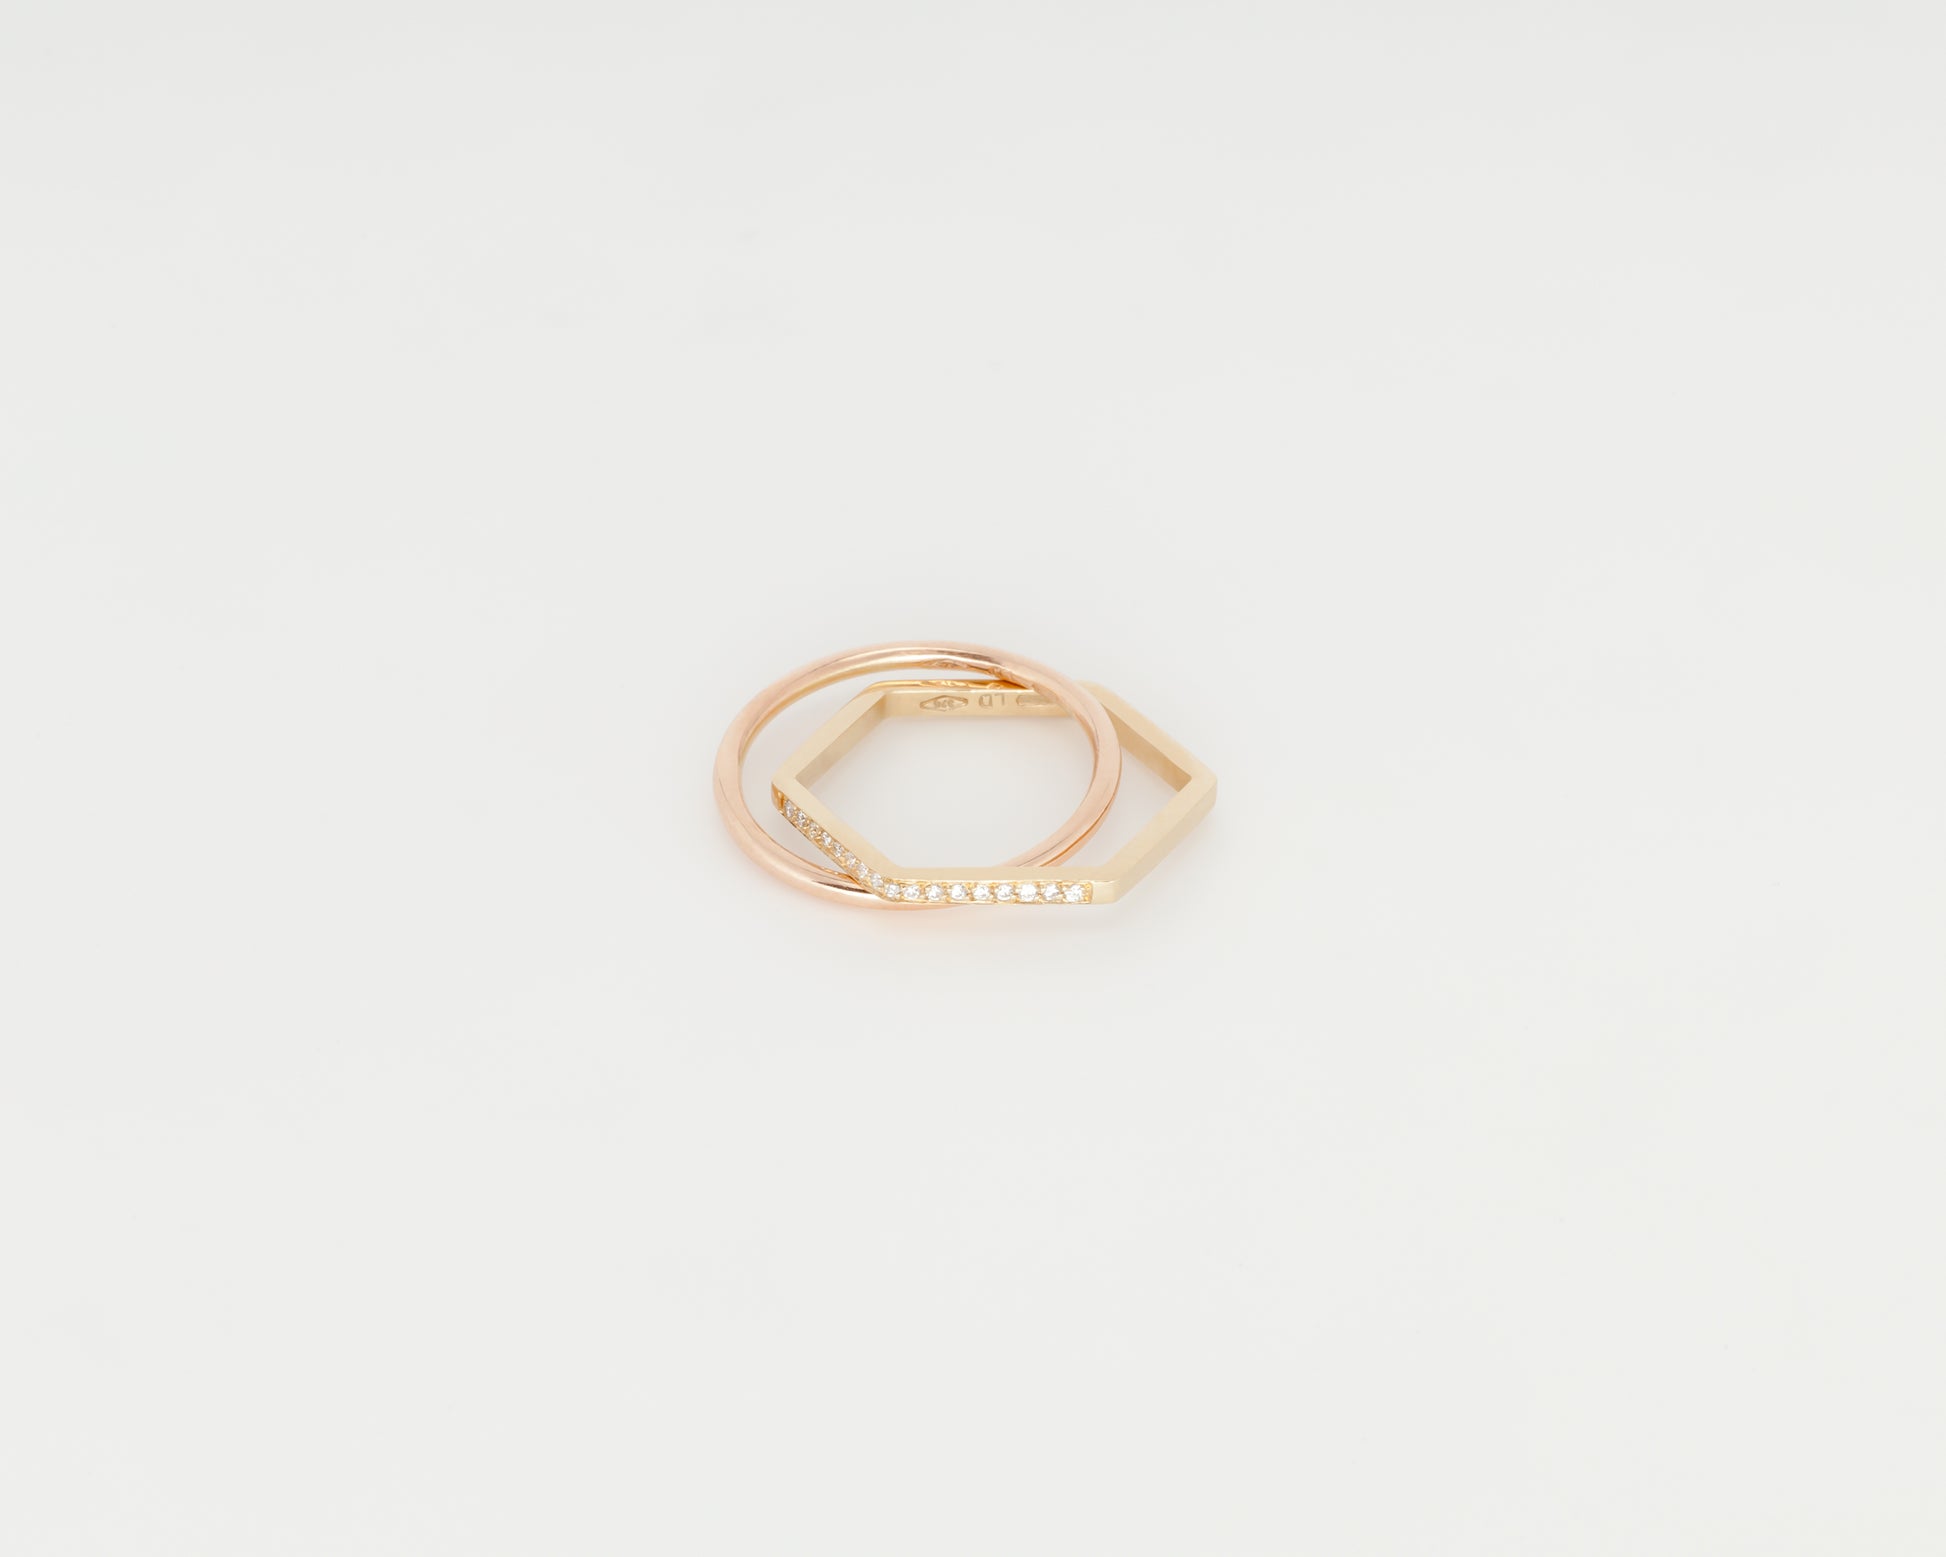 Yellow and rose gold ring,18KT with diamonds - Cerchio Esagono